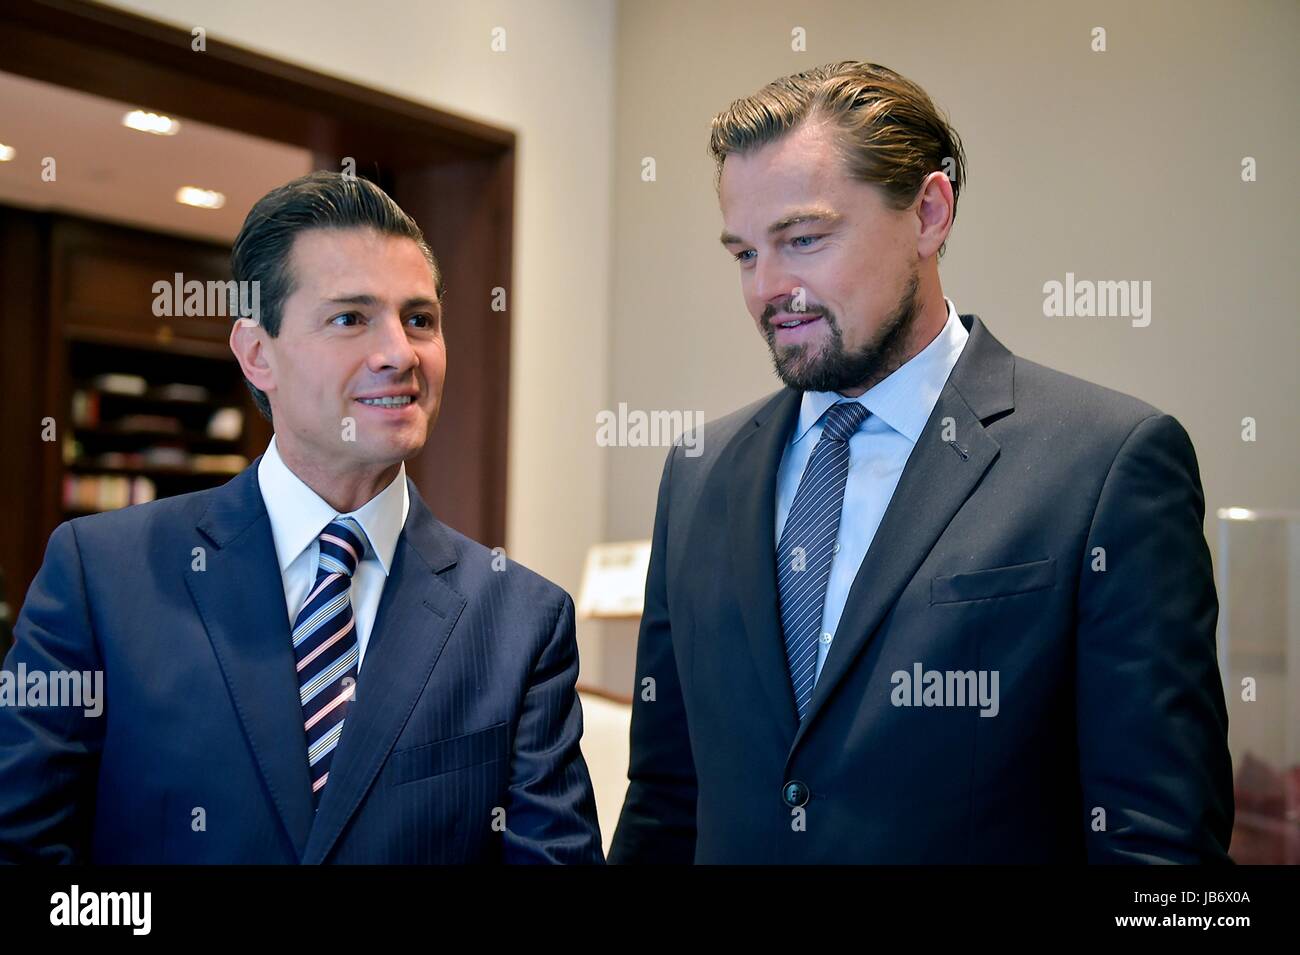 Mexico City, Mexico. 09th June, 2017. Mexican President Enrique Pena Nieto, left, and actor Leonardo DiCaprio discuss the critically endangered Vaquita, a porpoise native to Mexico's Gulf of California, at the presidential palace Los Pinos June 8, 2017 in Mexico City, Mexico. DiCaprio is joining forces with Pena Nieto and Mexican billionaire Carlos Slim to try and save the Vaquita from extinction. (photo by Presidenciamx via Planetpix) Stock Photo